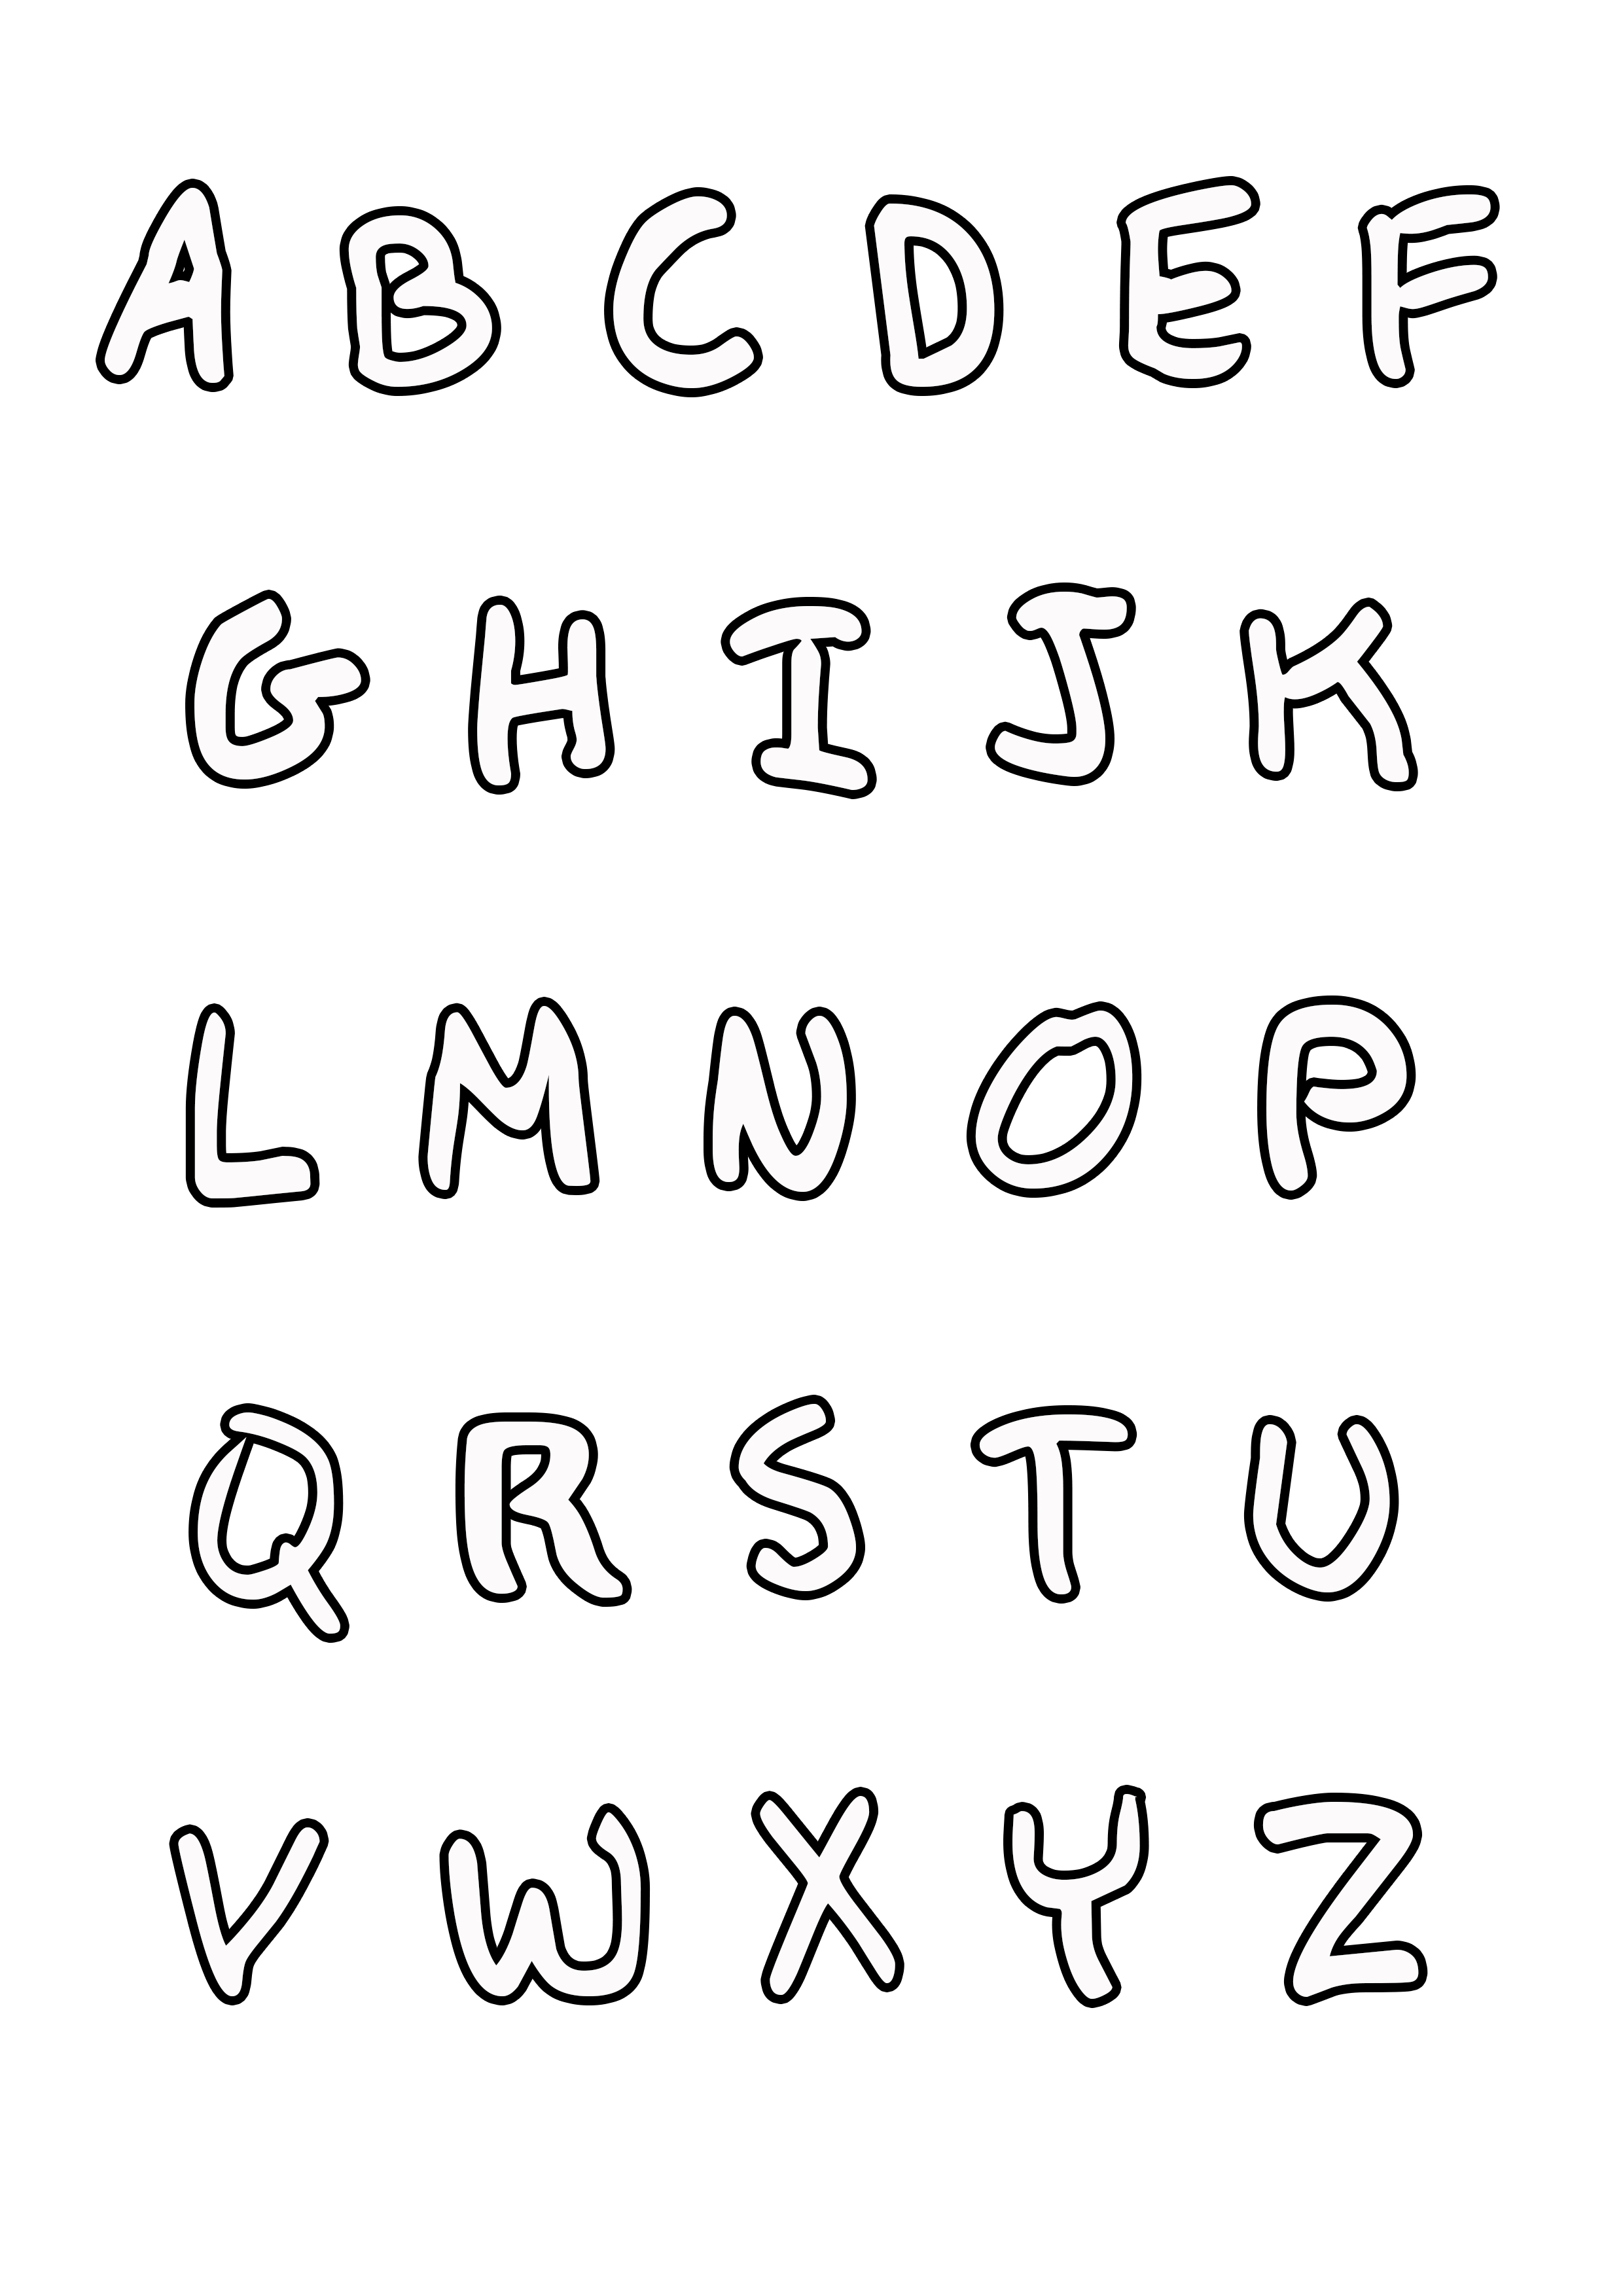 Download Alphabet to print : From A to Z - Alphabet Kids Coloring Pages